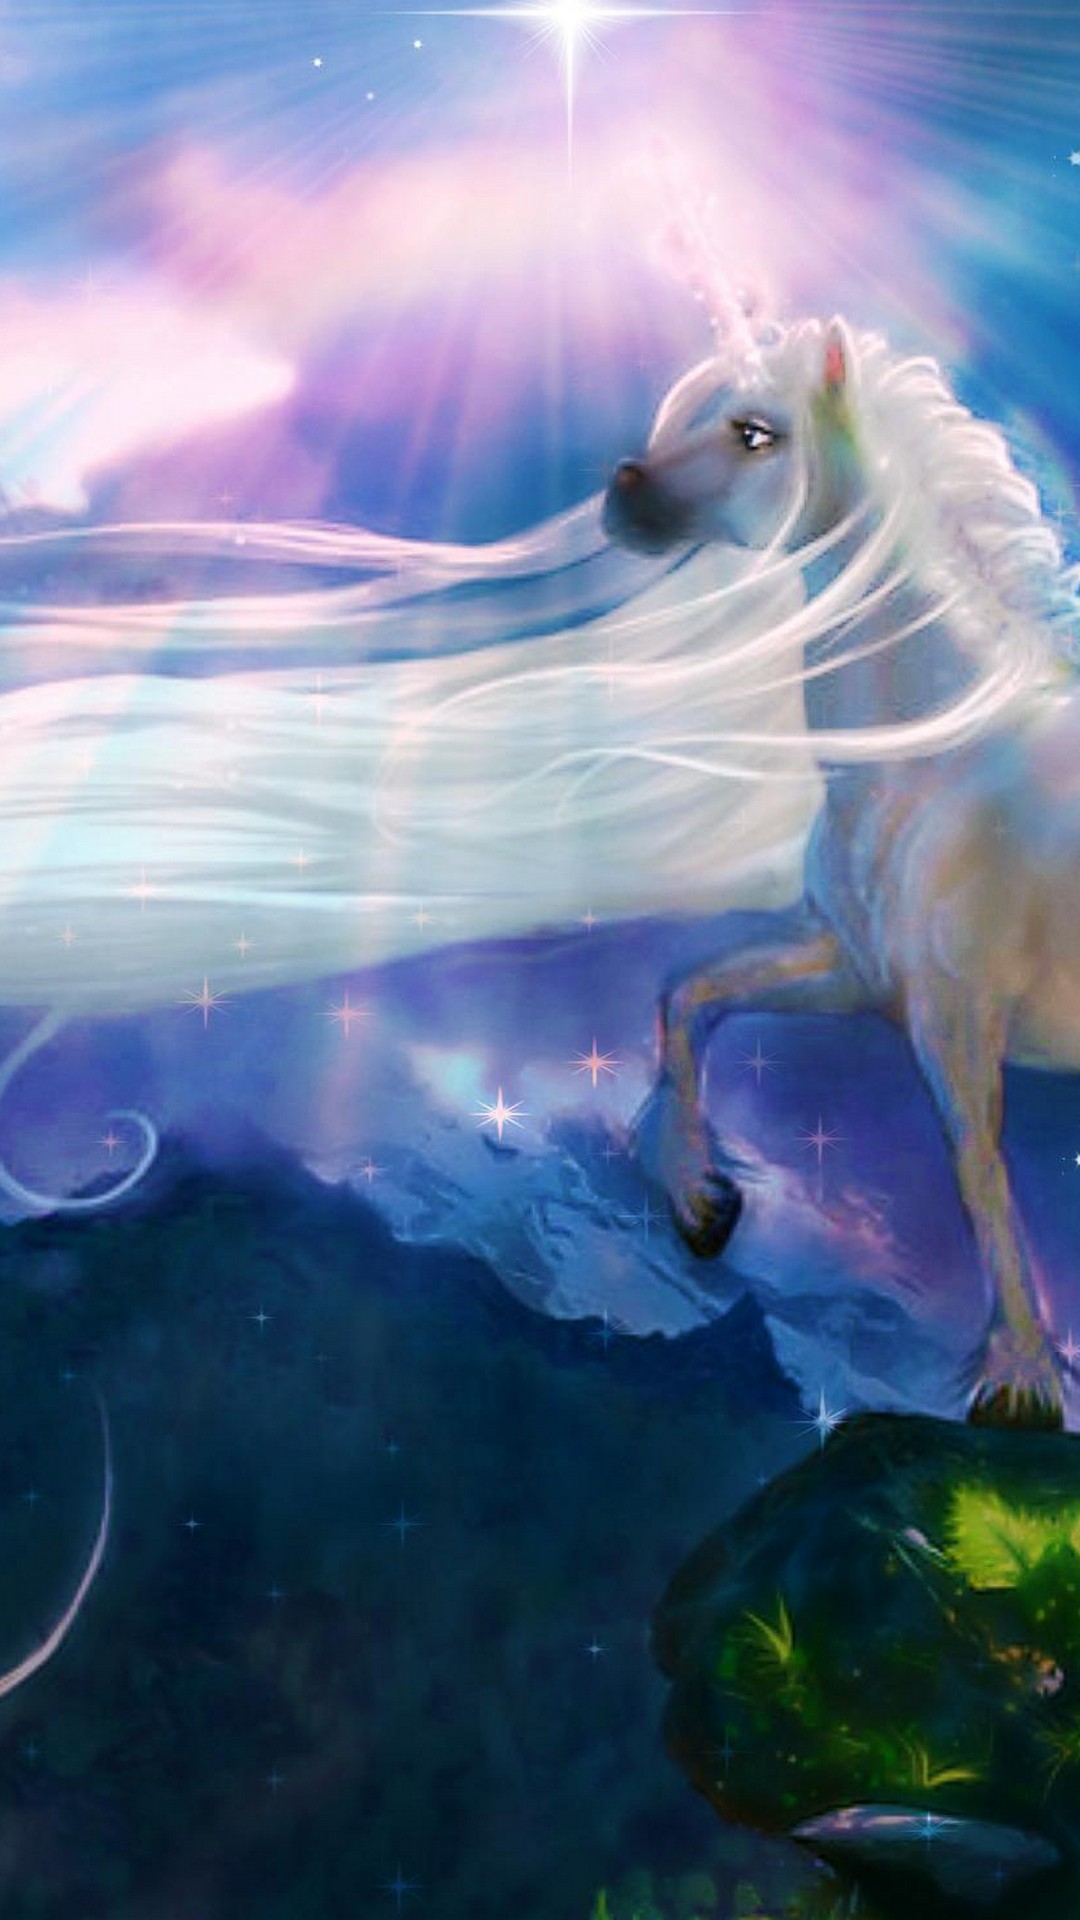 Wallpaper Android Unicorn With high-resolution 1080X1920 pixel. You can use this wallpaper for your Android backgrounds, Tablet, Samsung Screensavers, Mobile Phone Lock Screen and another Smartphones device